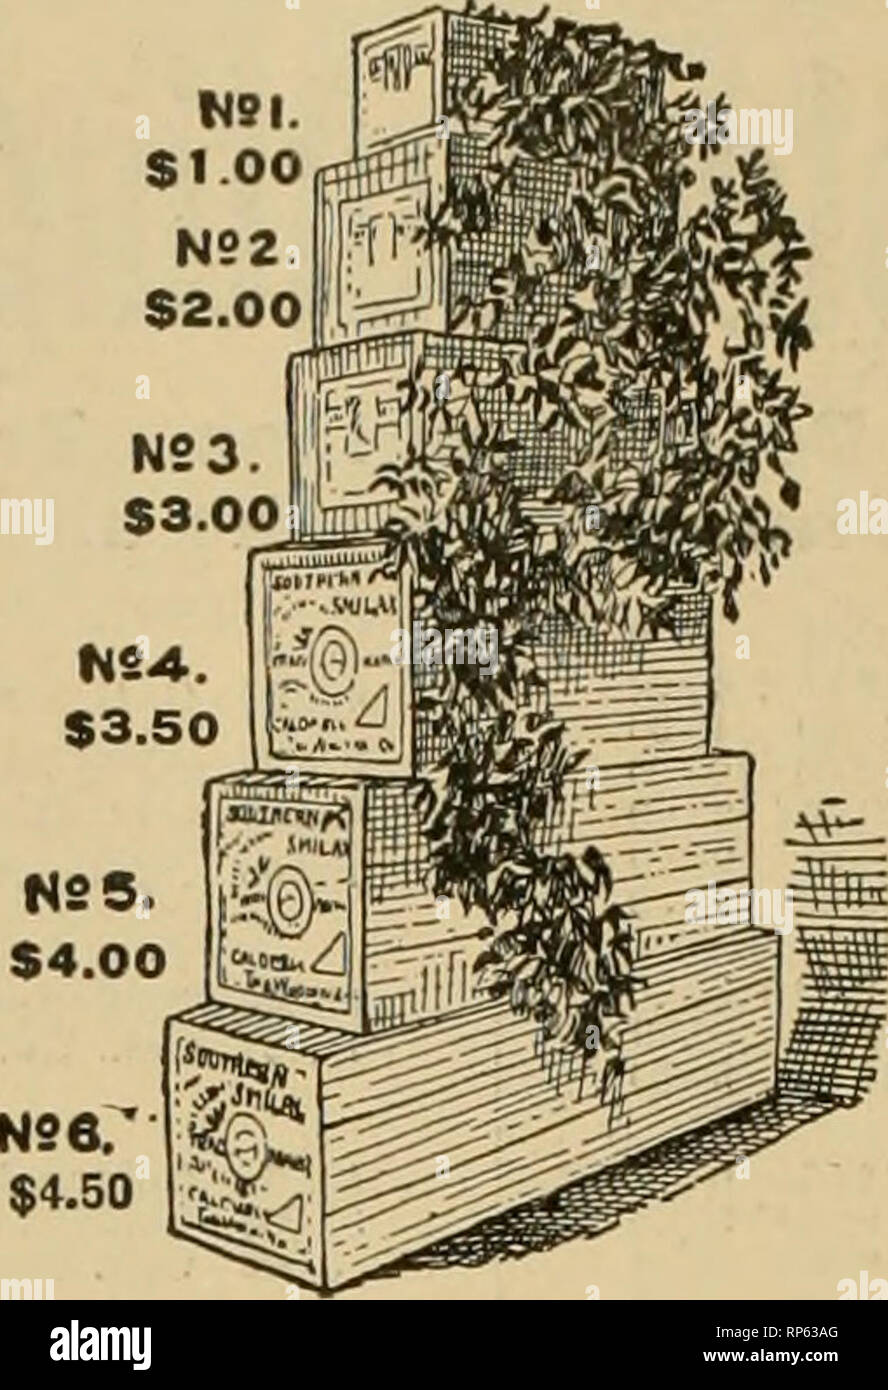 . The American florist : a weekly journal for the trade. Floriculture; Florists. 92G The American Florist. Jan. p, Carnations WORTH GROWrNG. We can make prompt shipment on the follow- ing sterling and well-known varieties. Strong R. C, guaranteed free from all disease. PINK. Per 100 1000 Enchantress S5 50 SftO.OO Mrs. E. A. Nelsrn 3.50 30.00 Mrs. Thos, VV. Lawson 2.35 20 00 .loost 1.75 15.00 Marquis.... 1.75 15.00 Enquirer 2.5) Dorothy 2.50 WHITE. Gov. Woloott 3.50 30.00 Boston Market 3.50 30.00 Innocence 250 22 51 Glacier 1.75 15.00 White Cloud 1.76 15.00 Flora Hill 1.75 15.00 SCARLET. Crane  Stock Photo